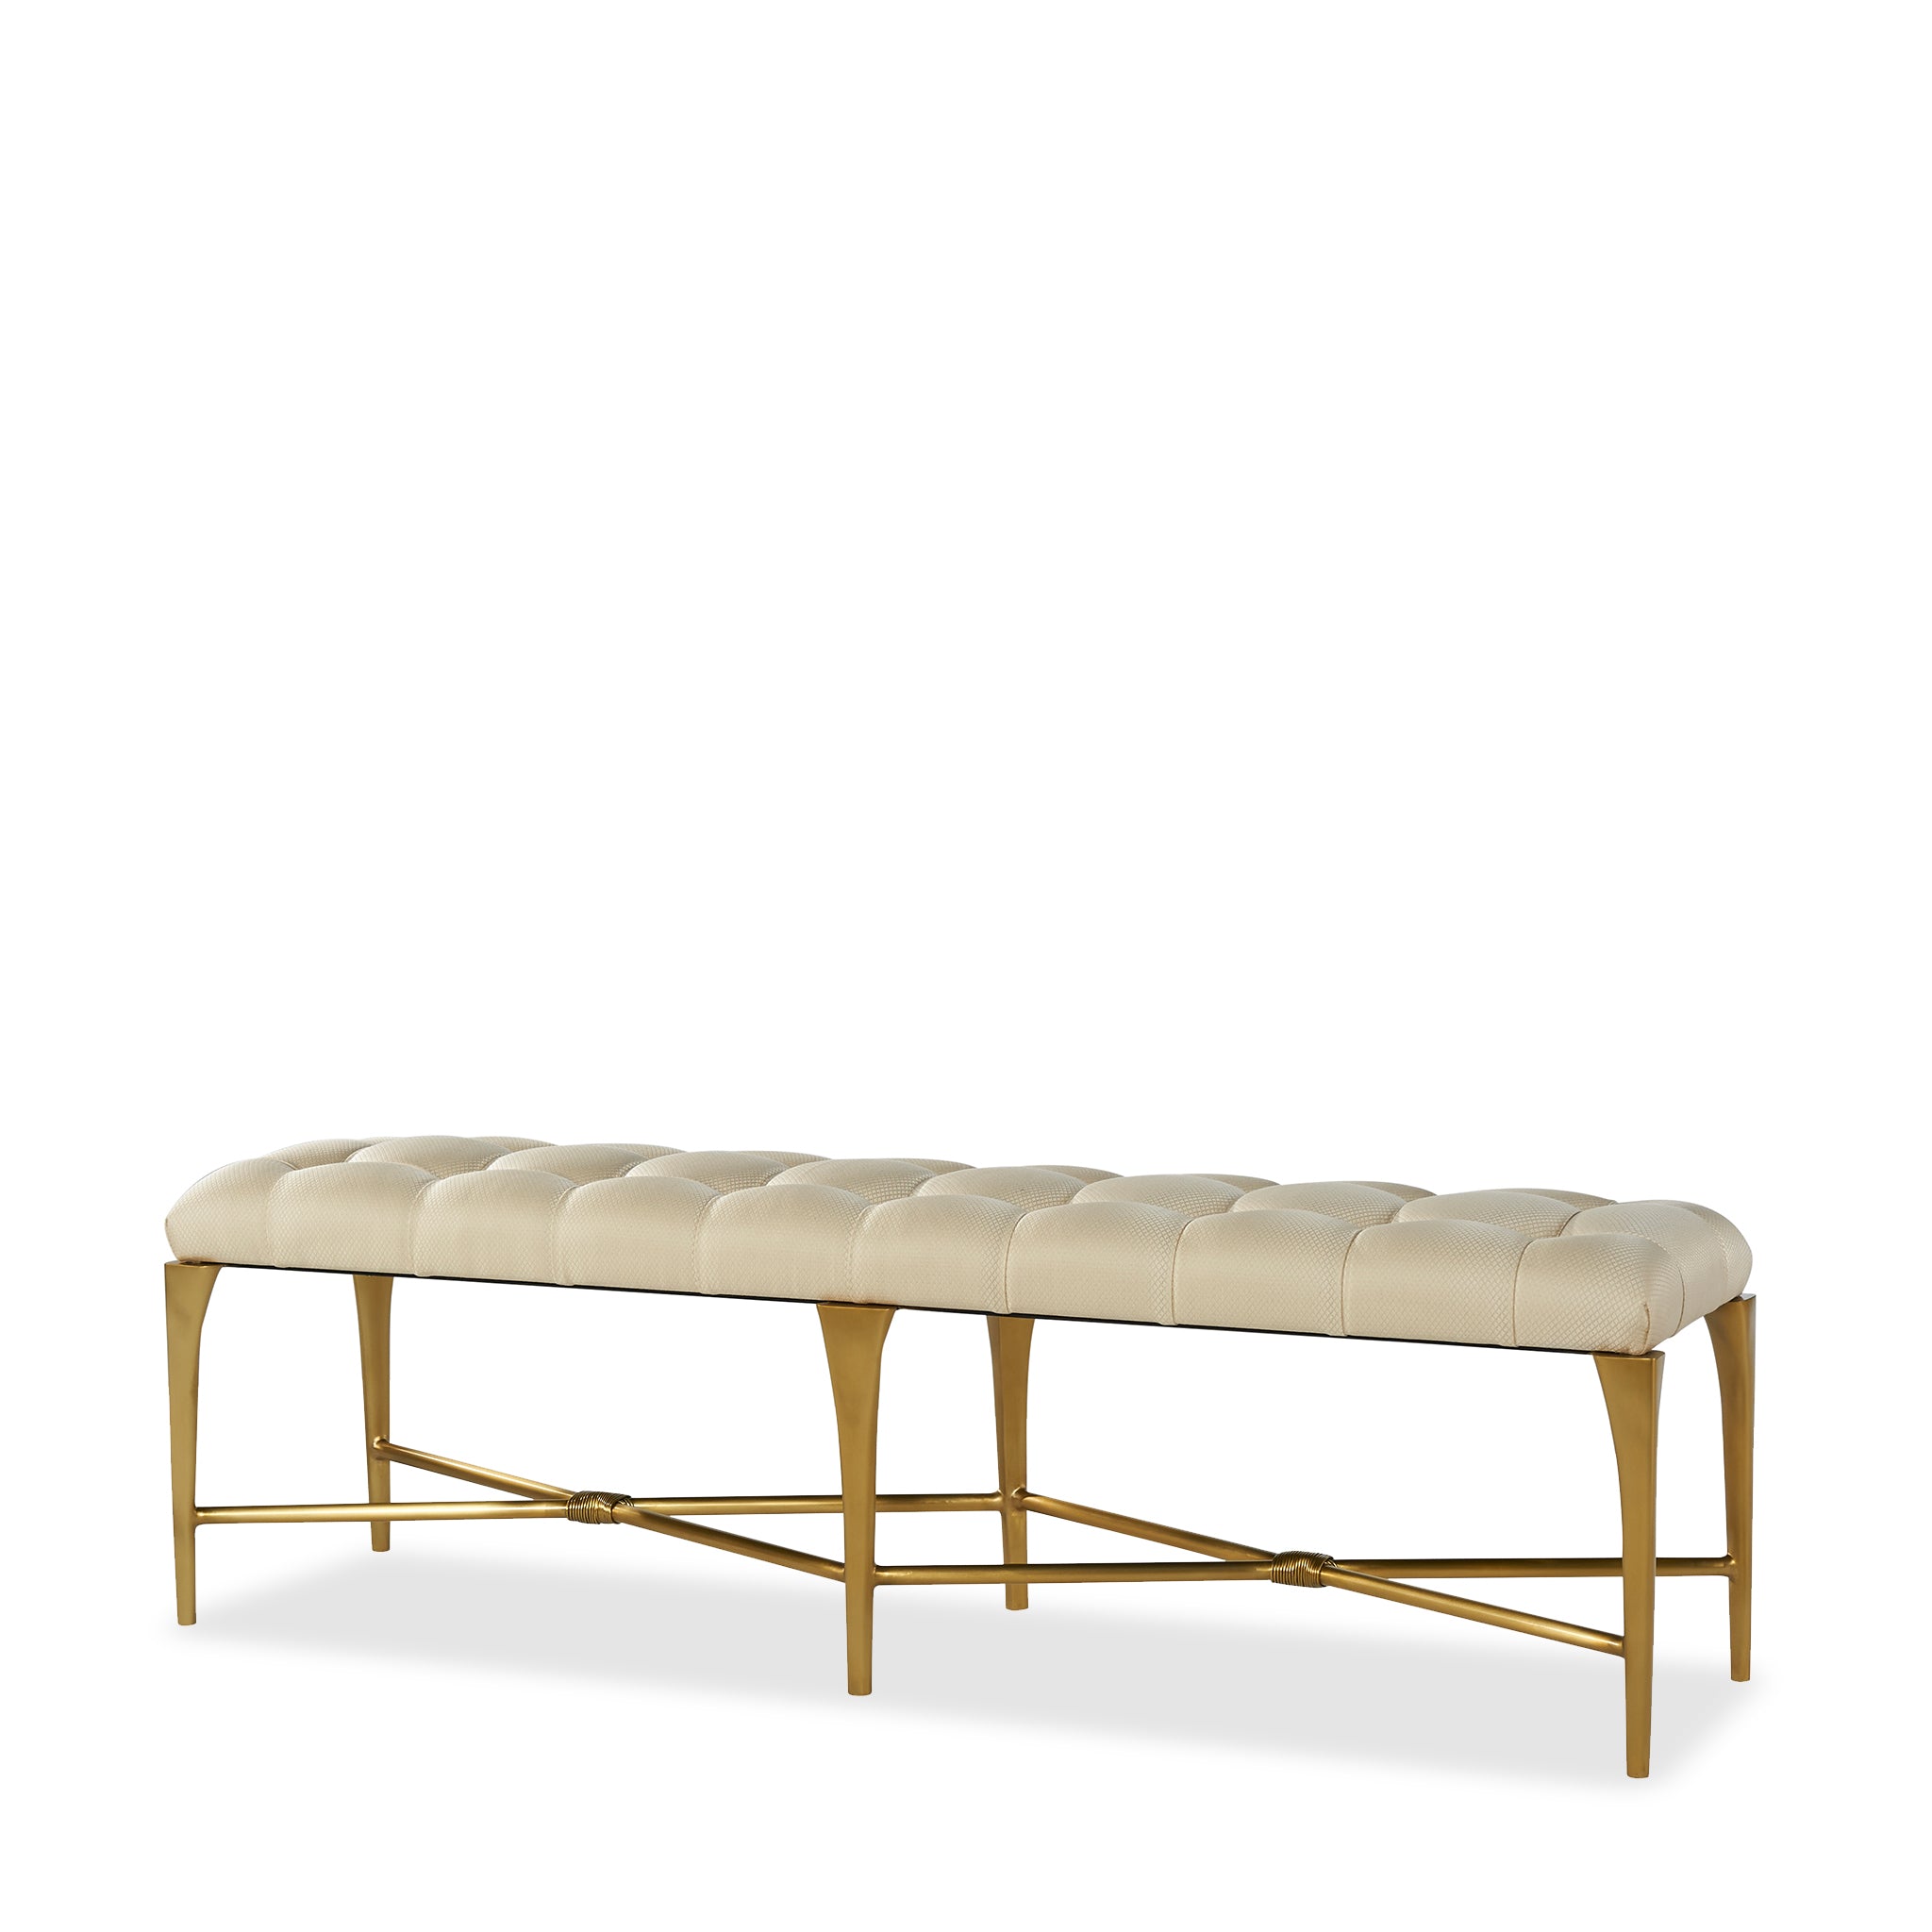 theodore alexander banquette tuft keno bench benches 